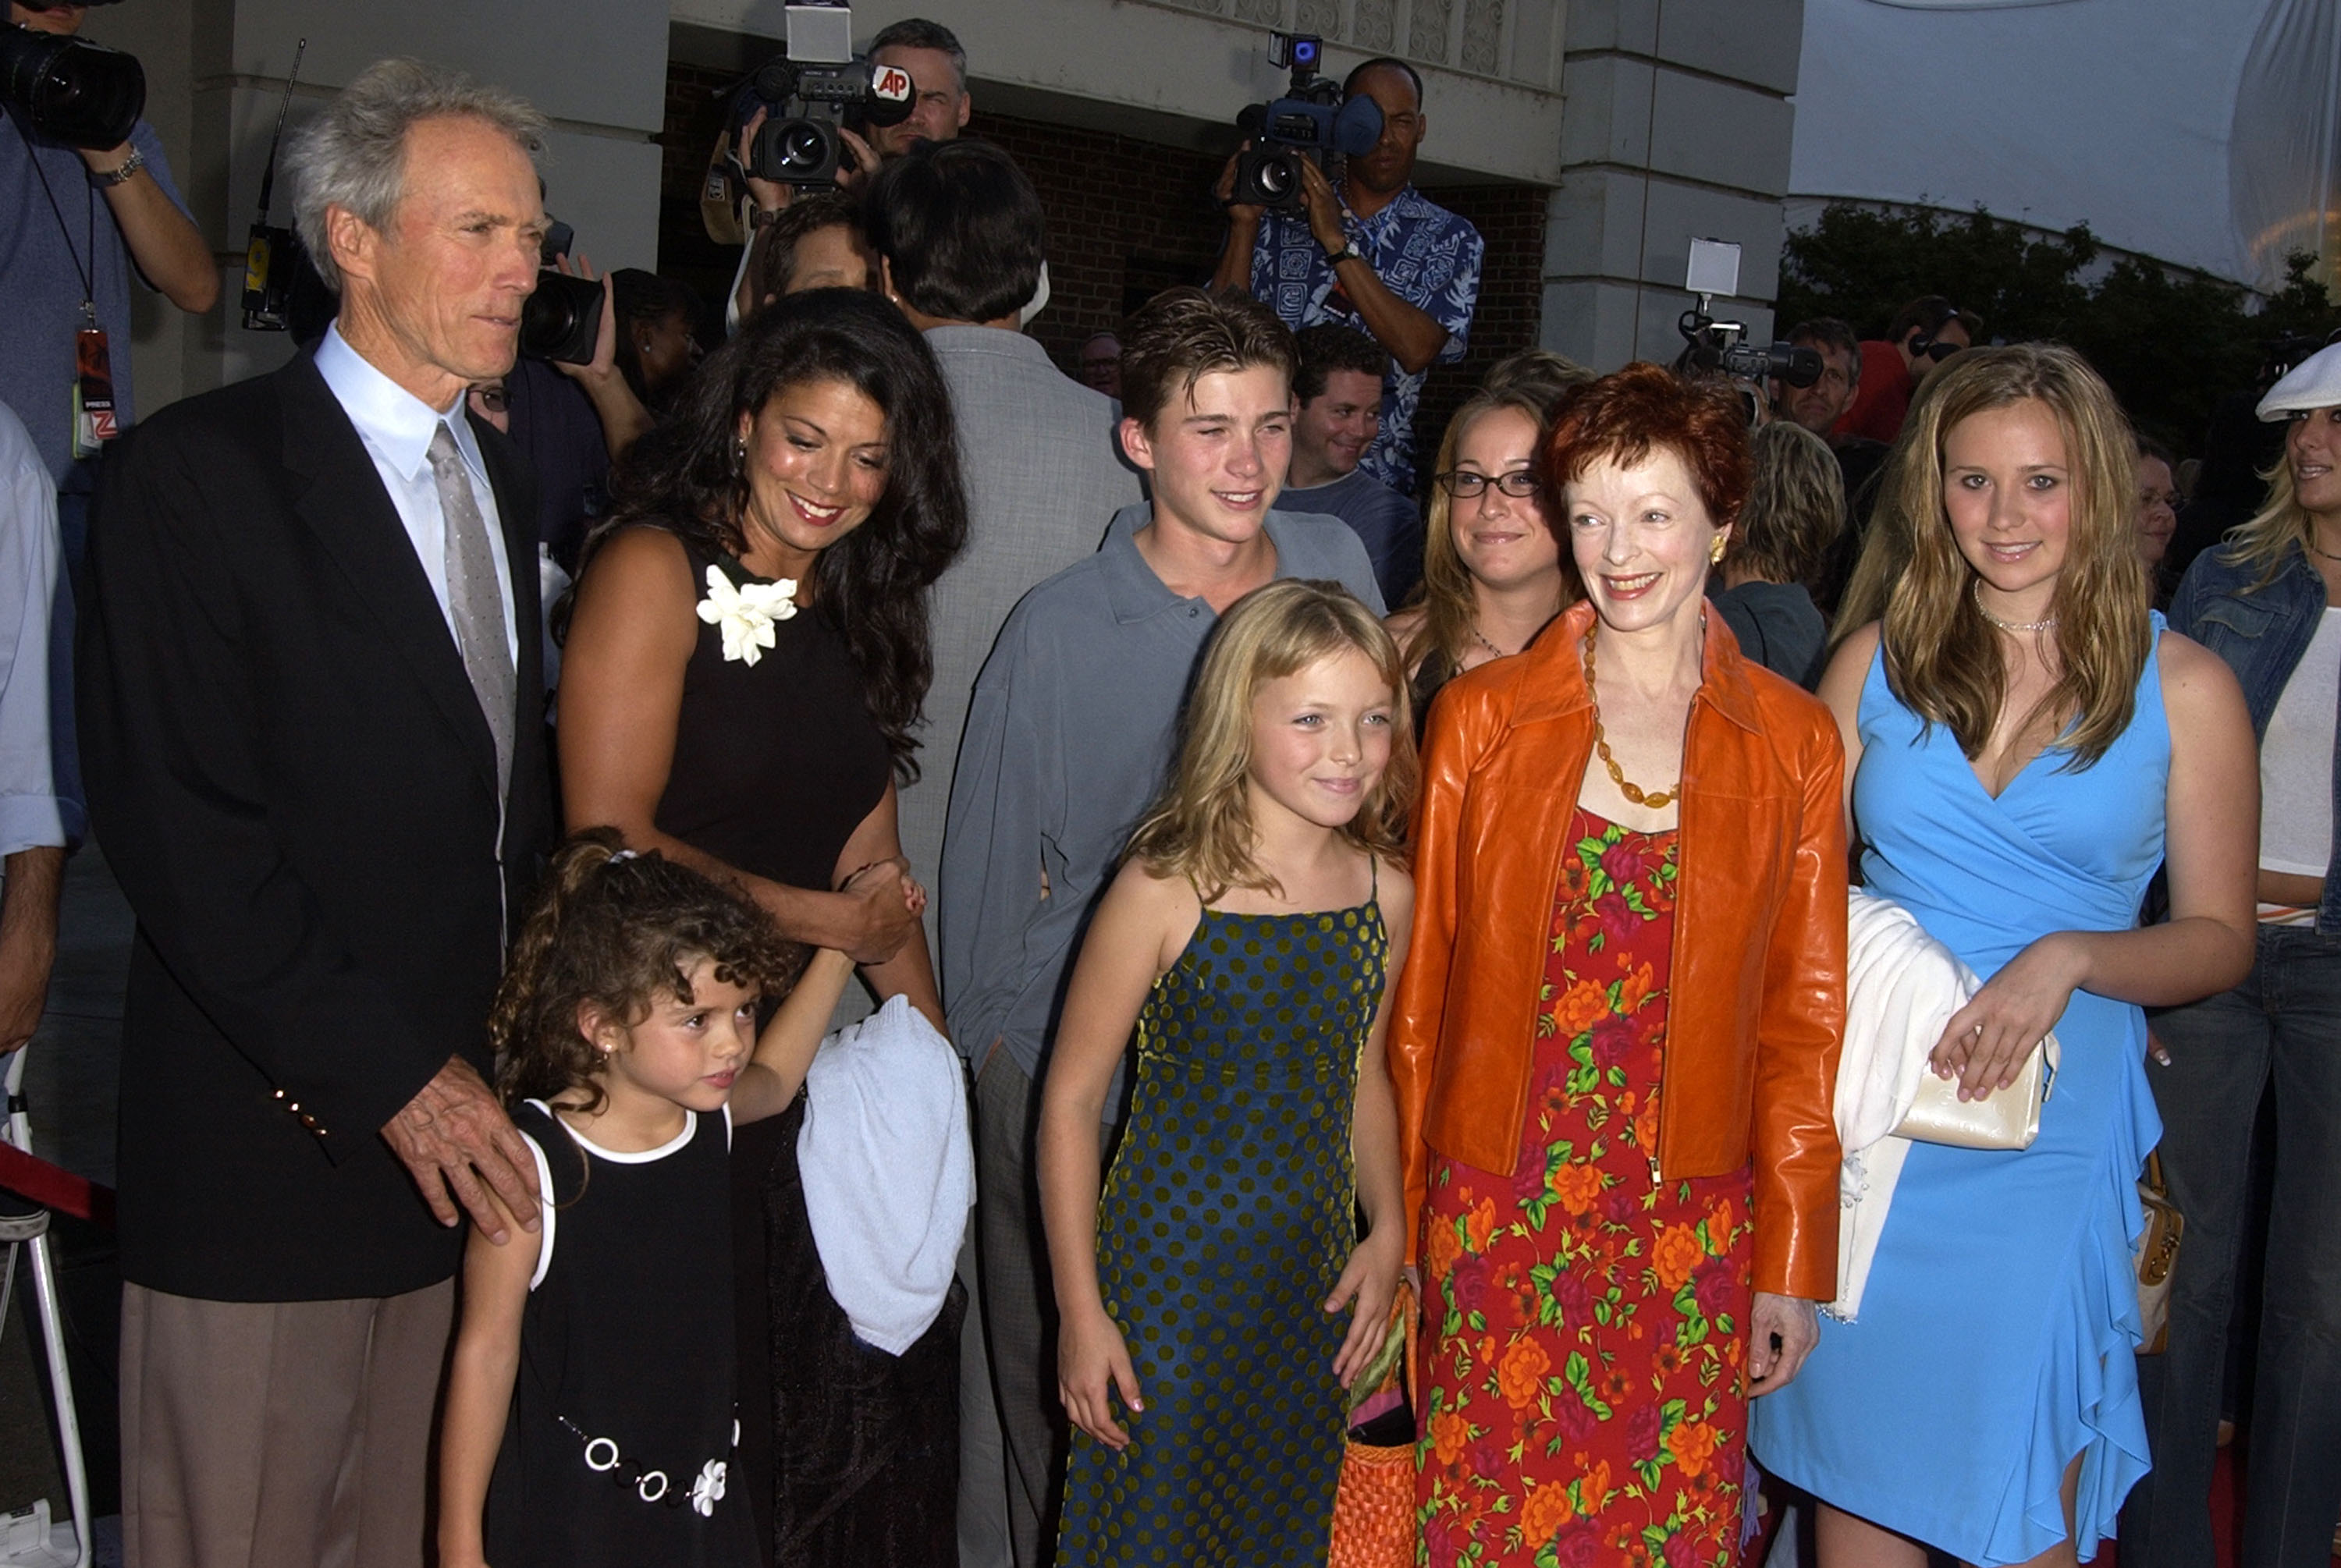 Clint Eastwood, Dina Eastwood, Frances Fisher & children Scott, Kathryn, Francesca & Morgan at the "Blood Work" premiere in 2002. | Source: Getty Images